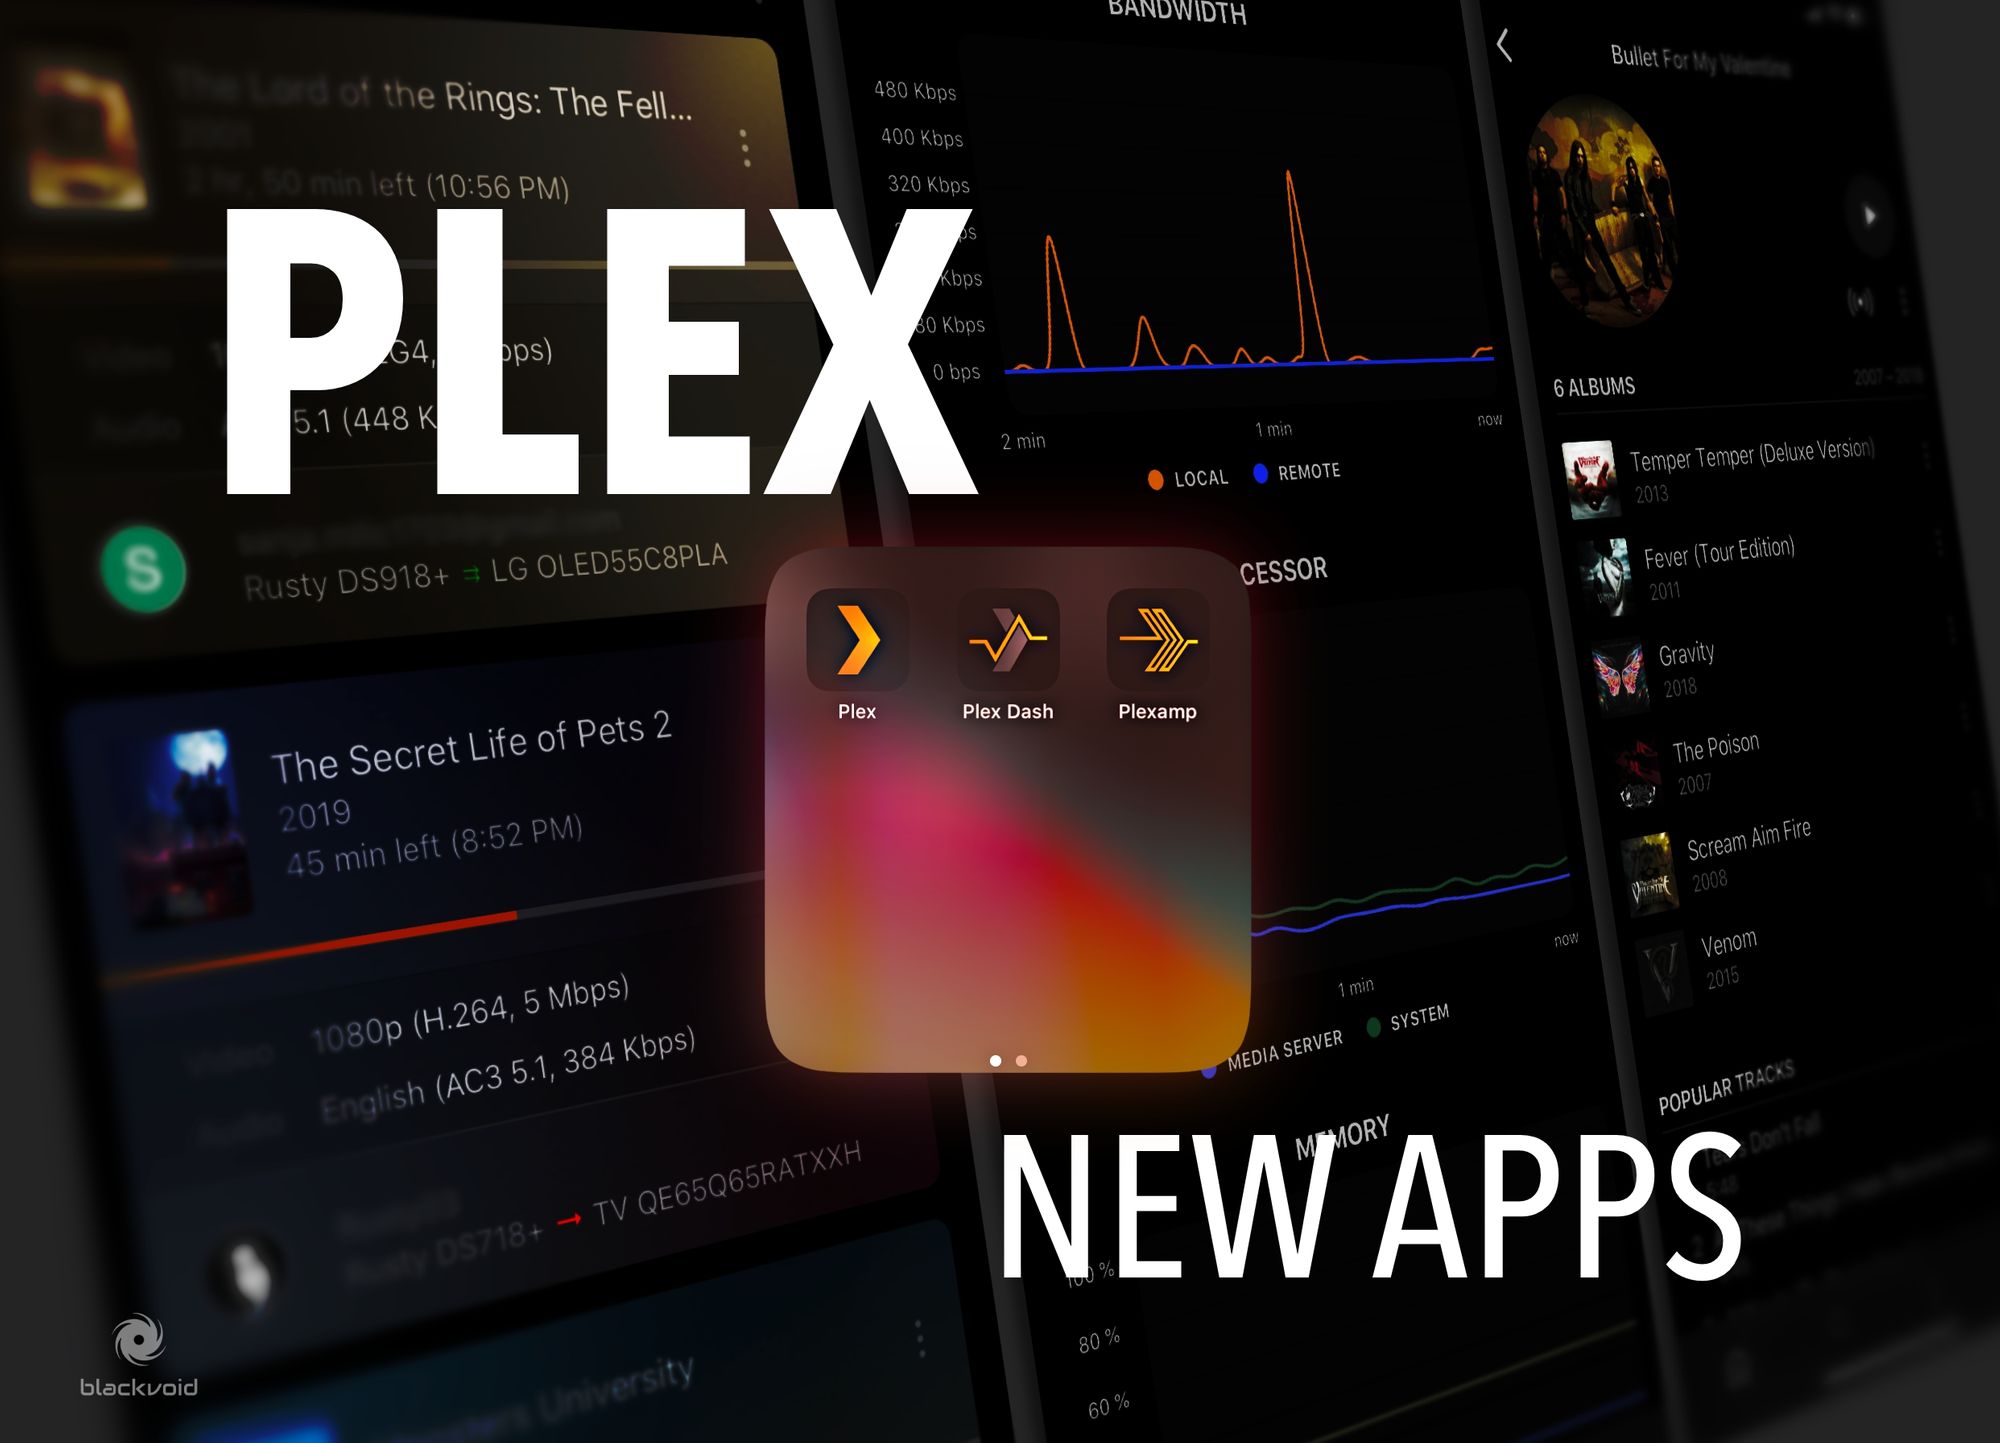 Plex Labs and their new creations